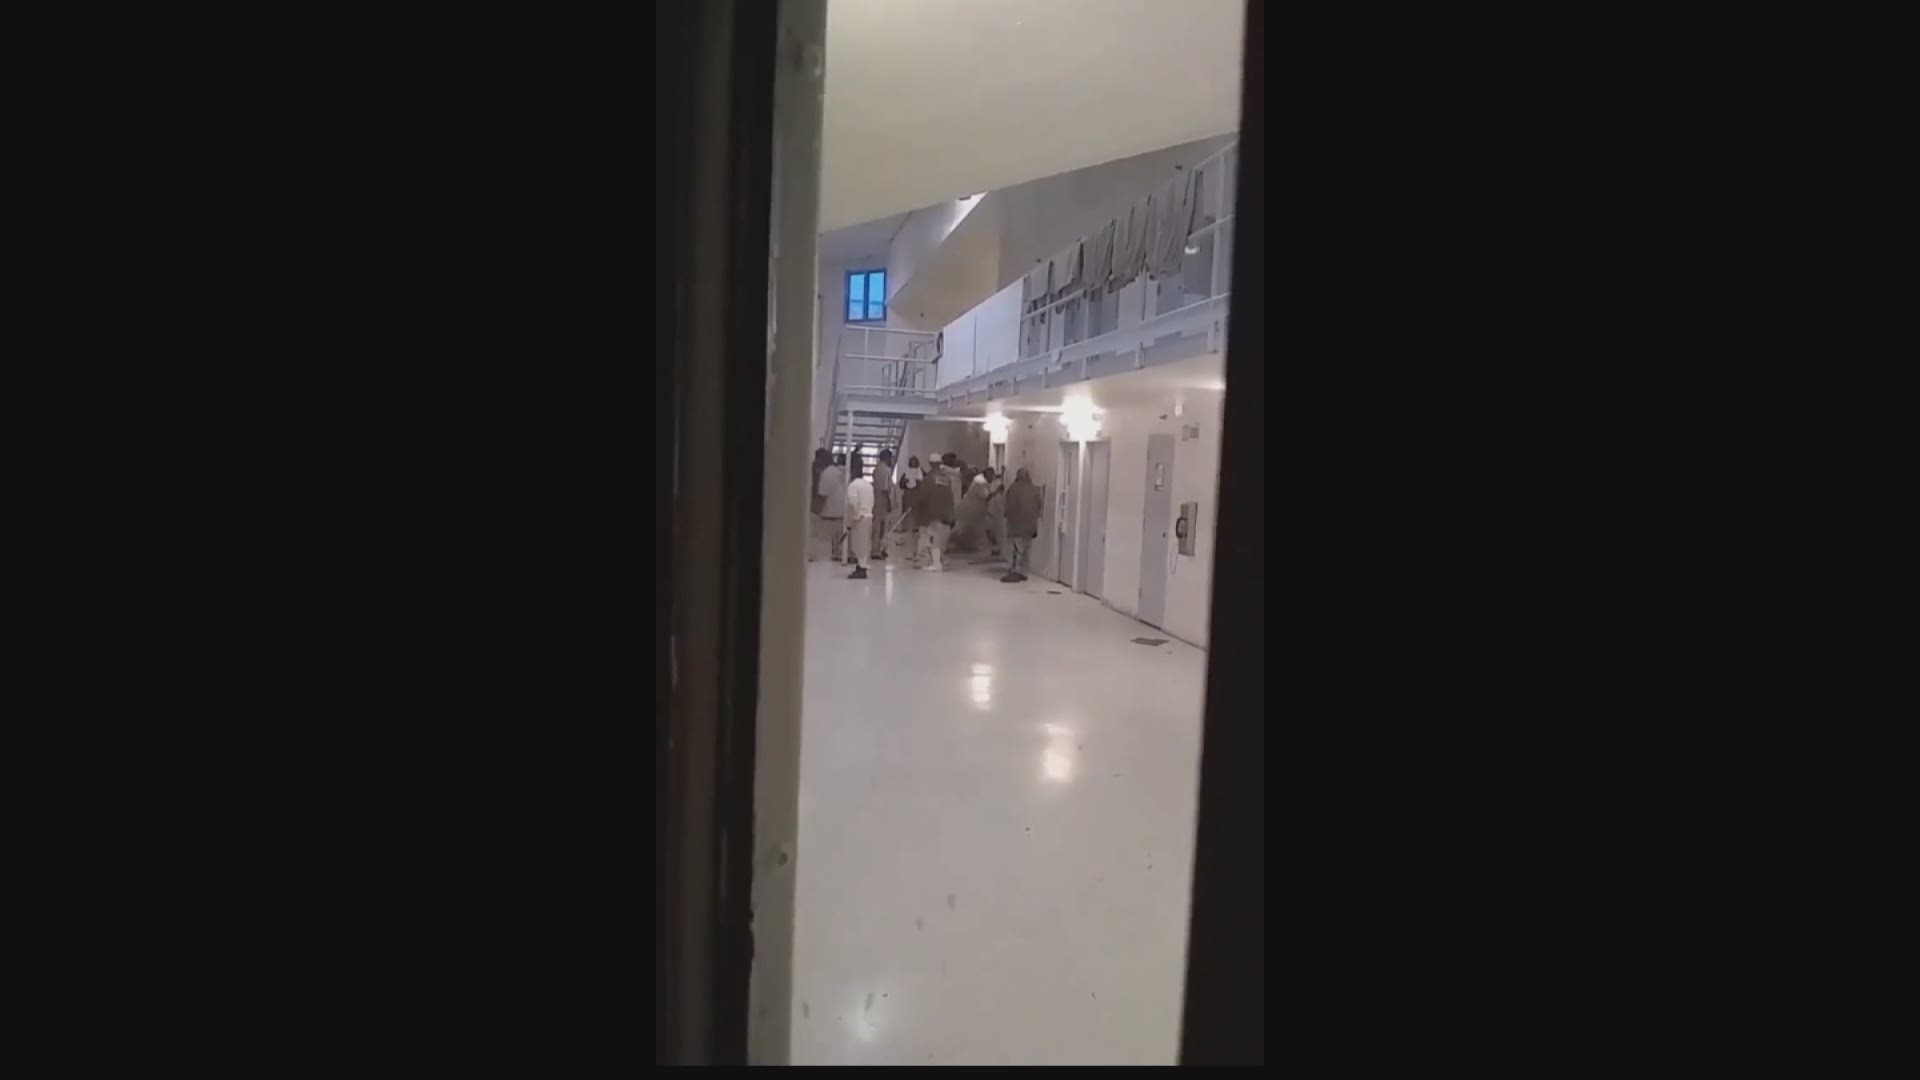 Video from inside Lee Correctional claims to show the moments surrounding the deaths of seven inmates.